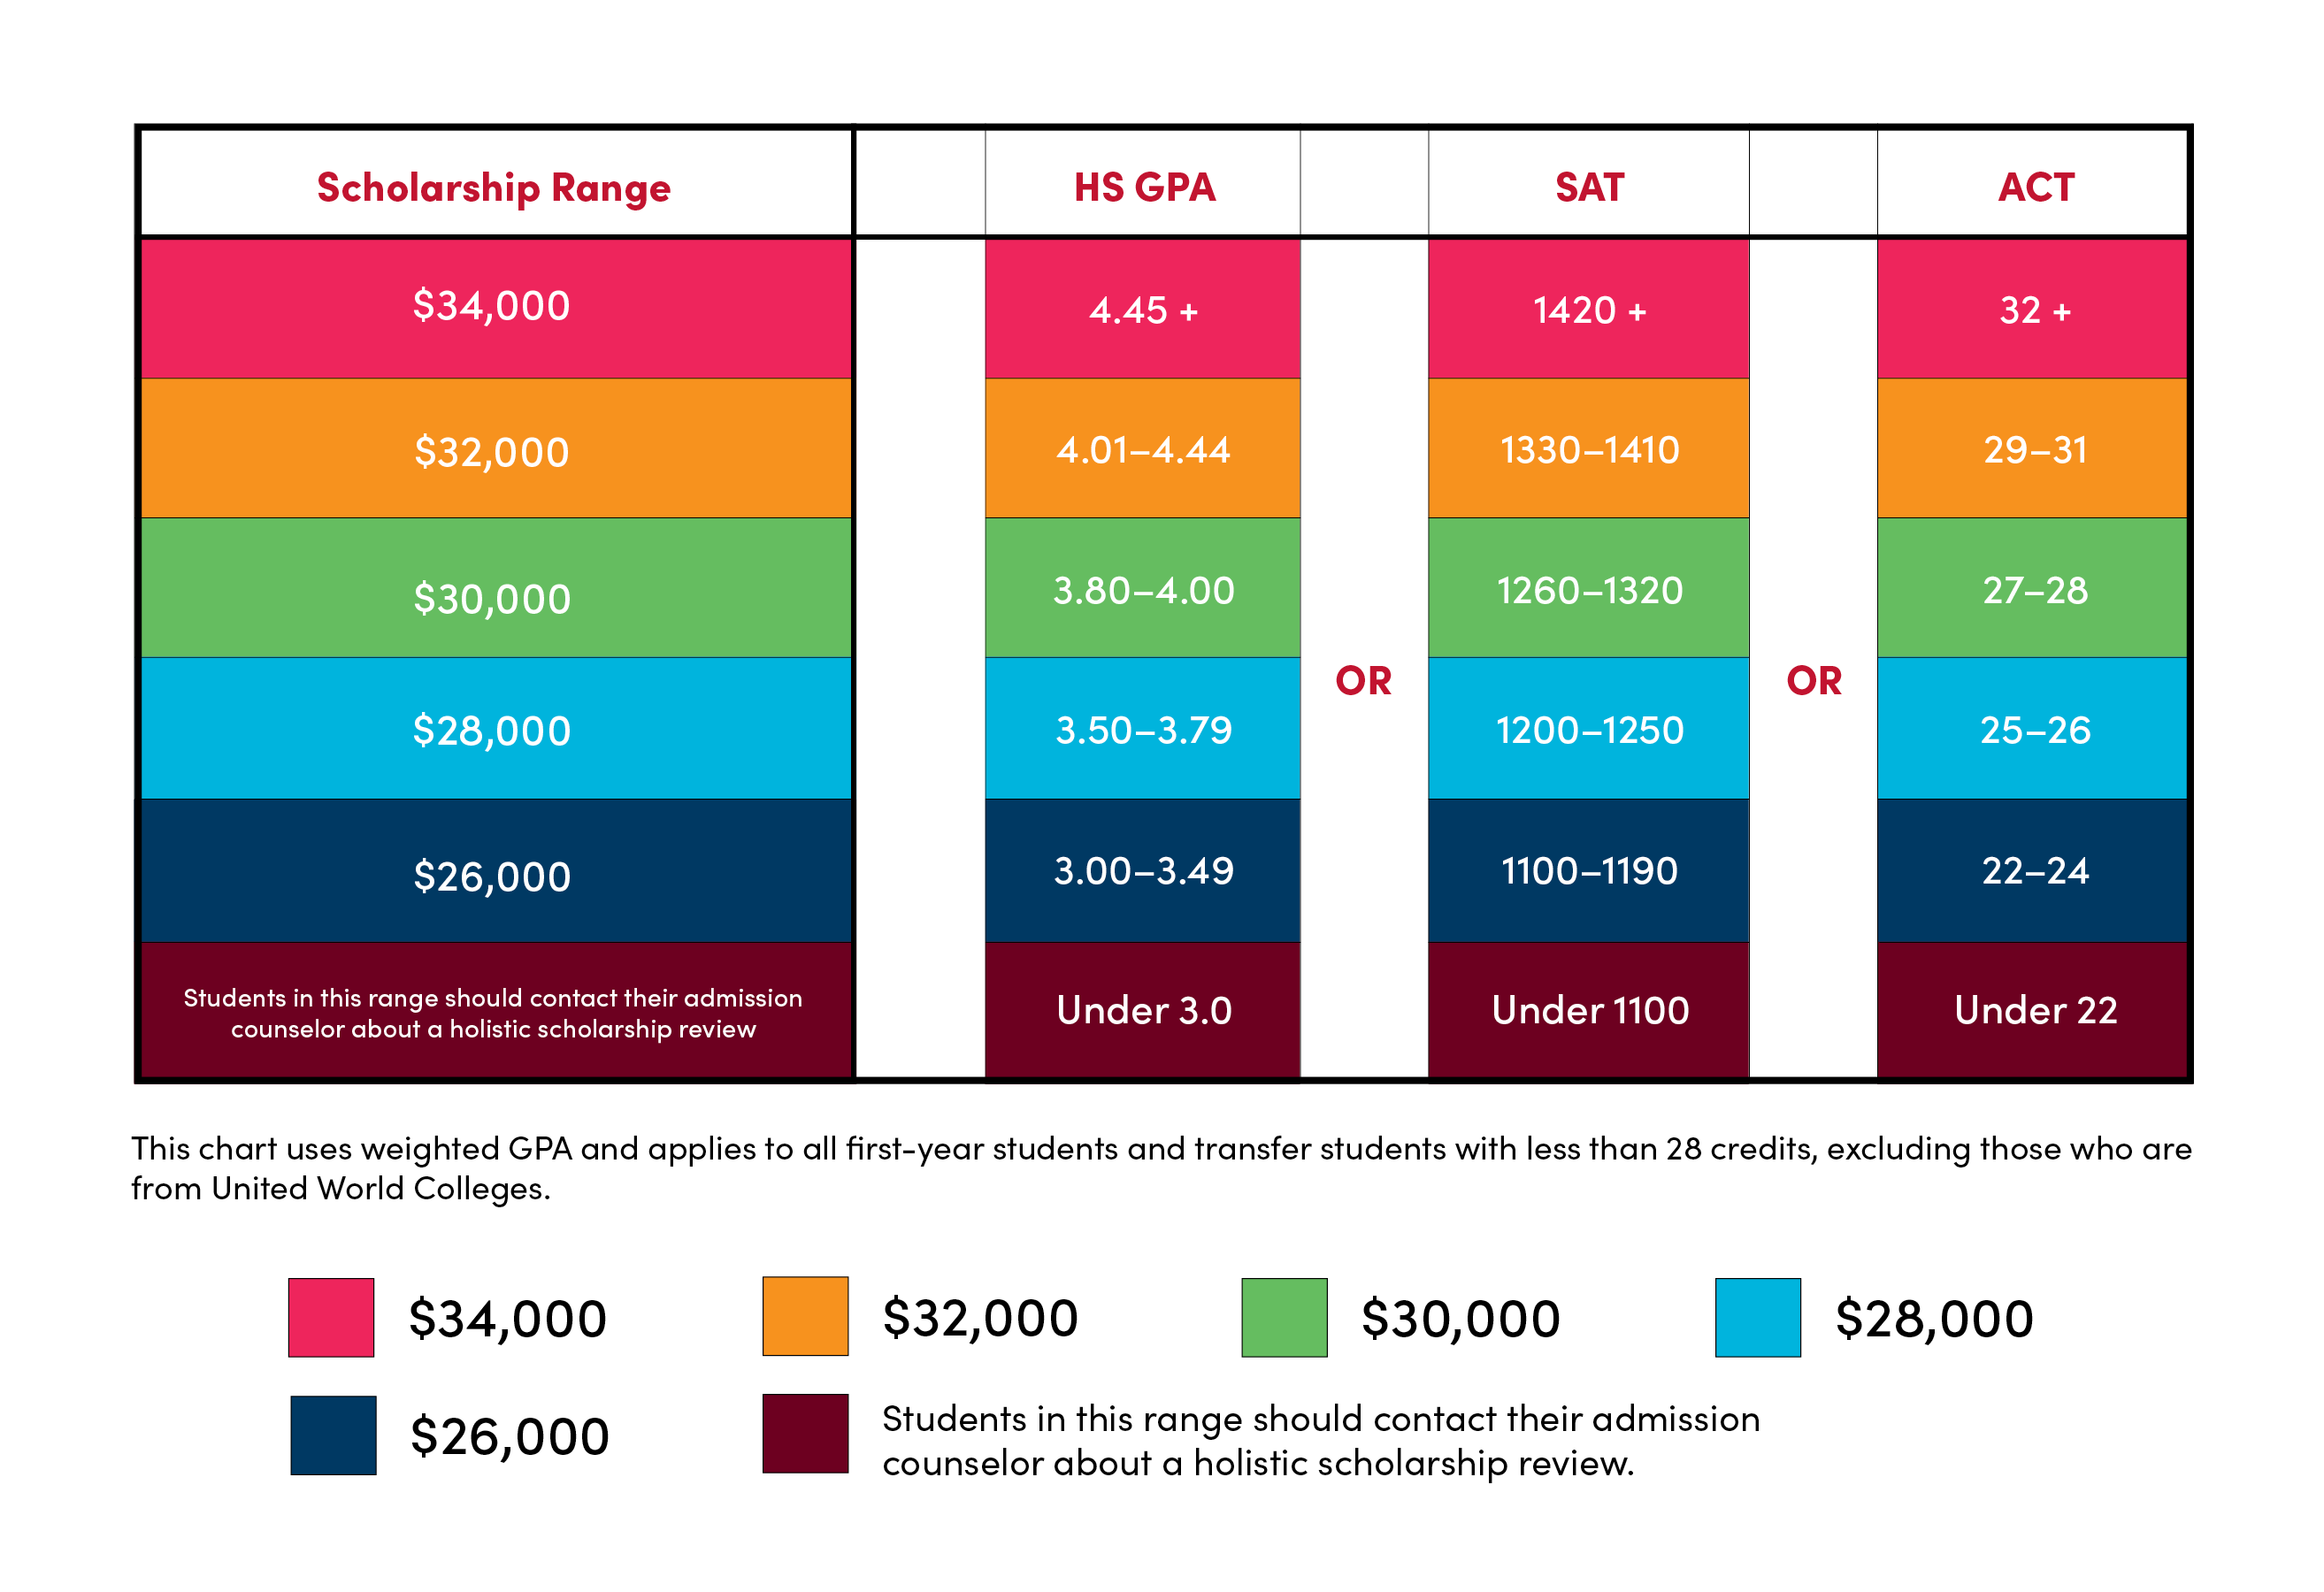 Making sense of financial aid and the value of a college education